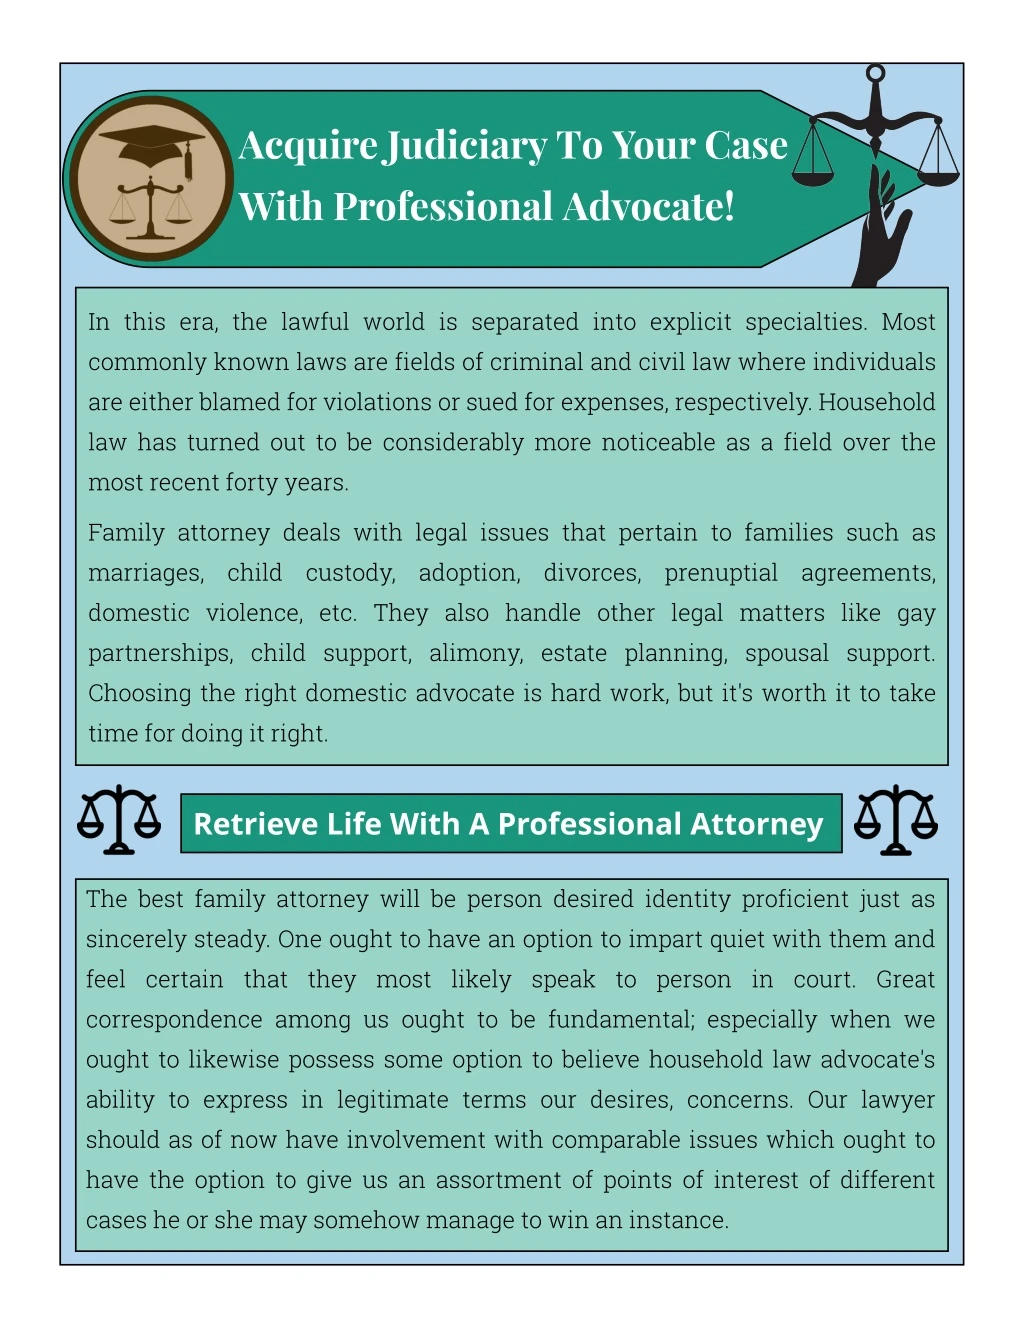 acquire judiciary to your case with professional